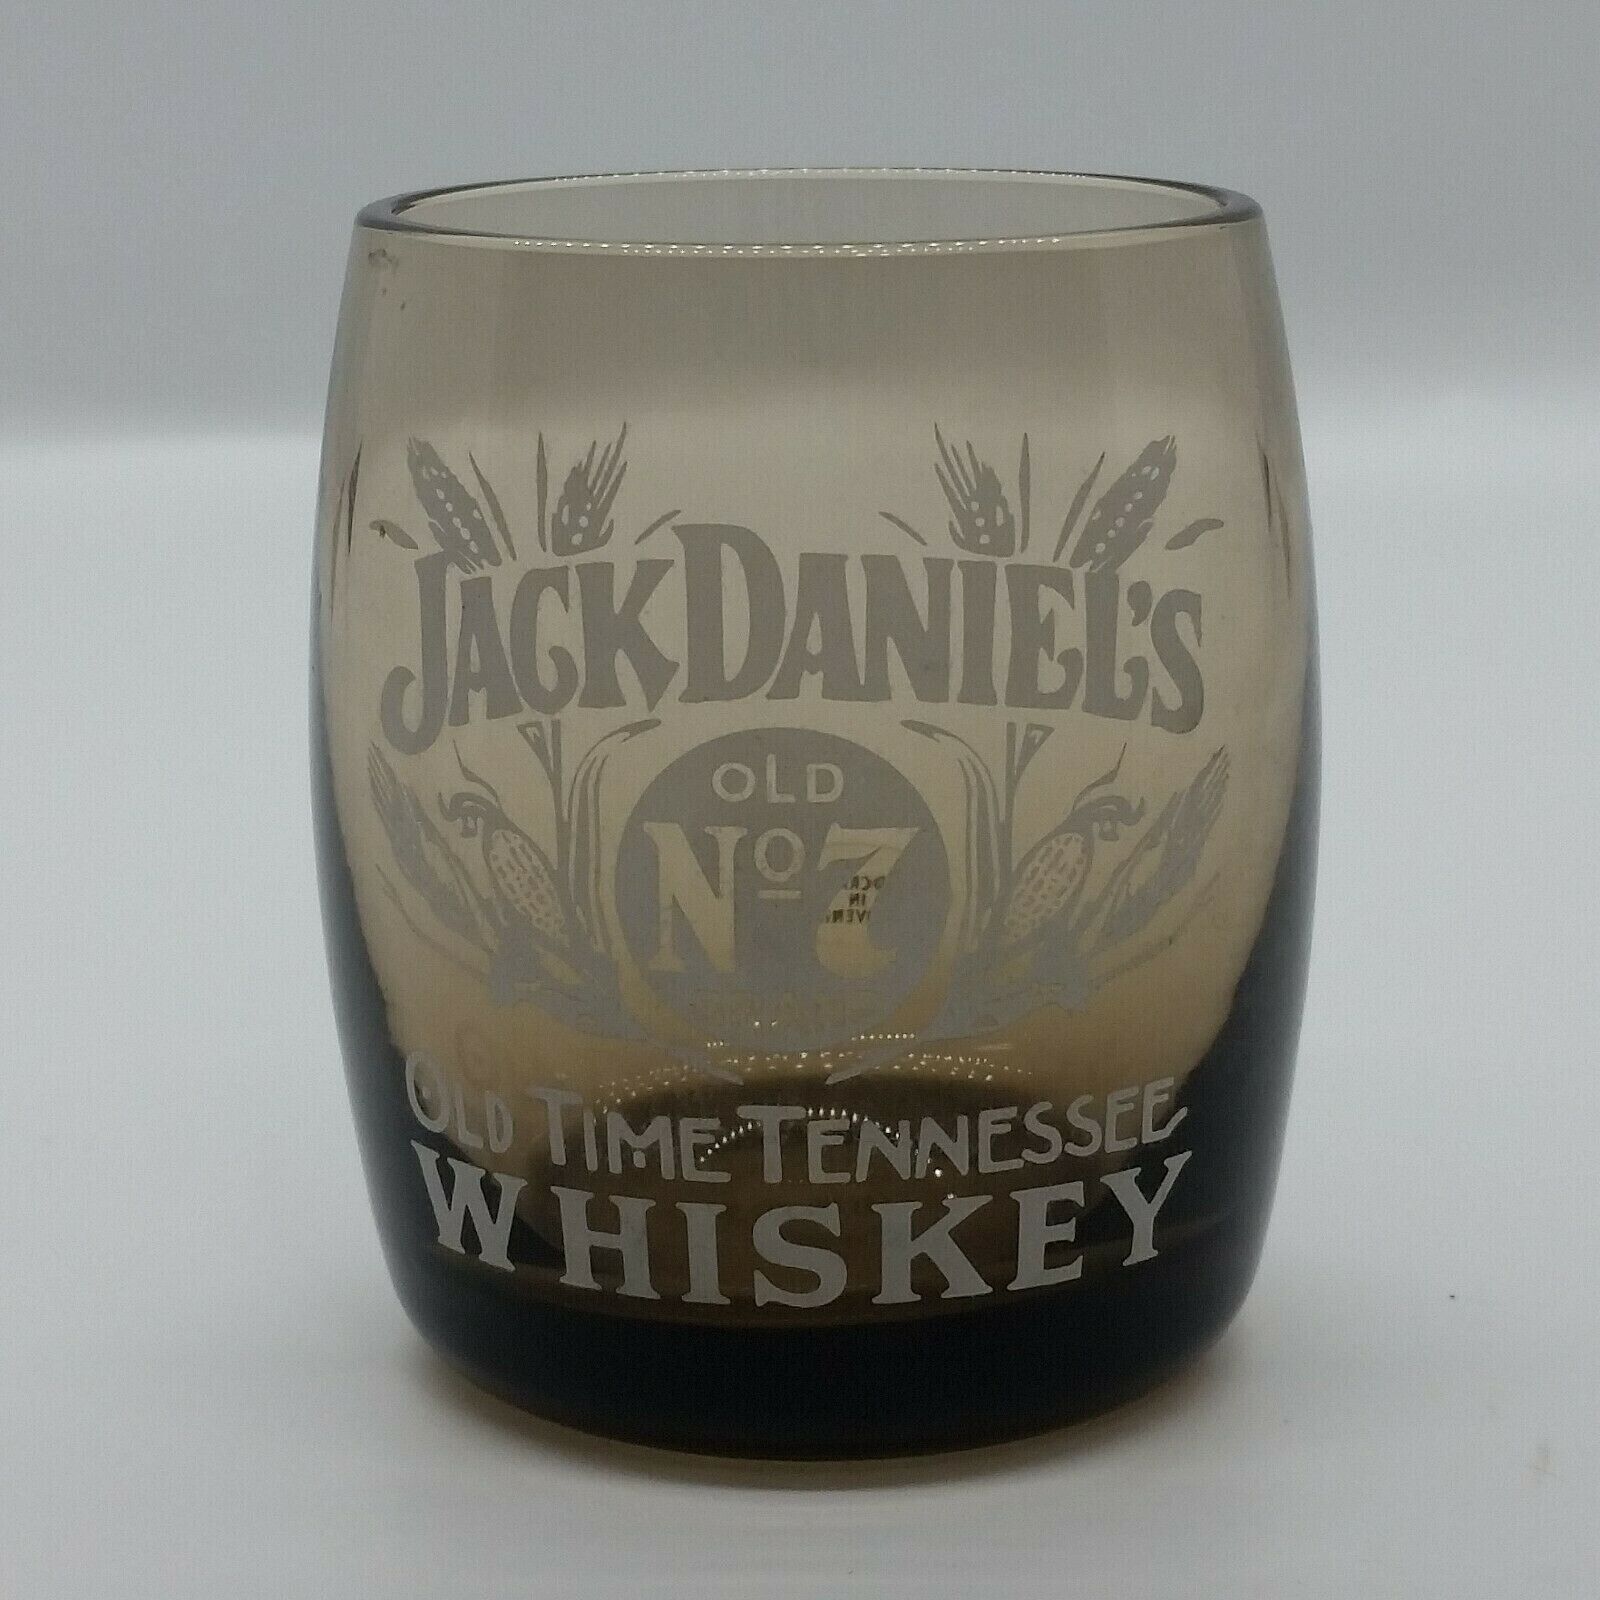 Jack Daniels Old Time Tennessee Whiskey Corn Shot Glass Collectable 2002 - $19.22